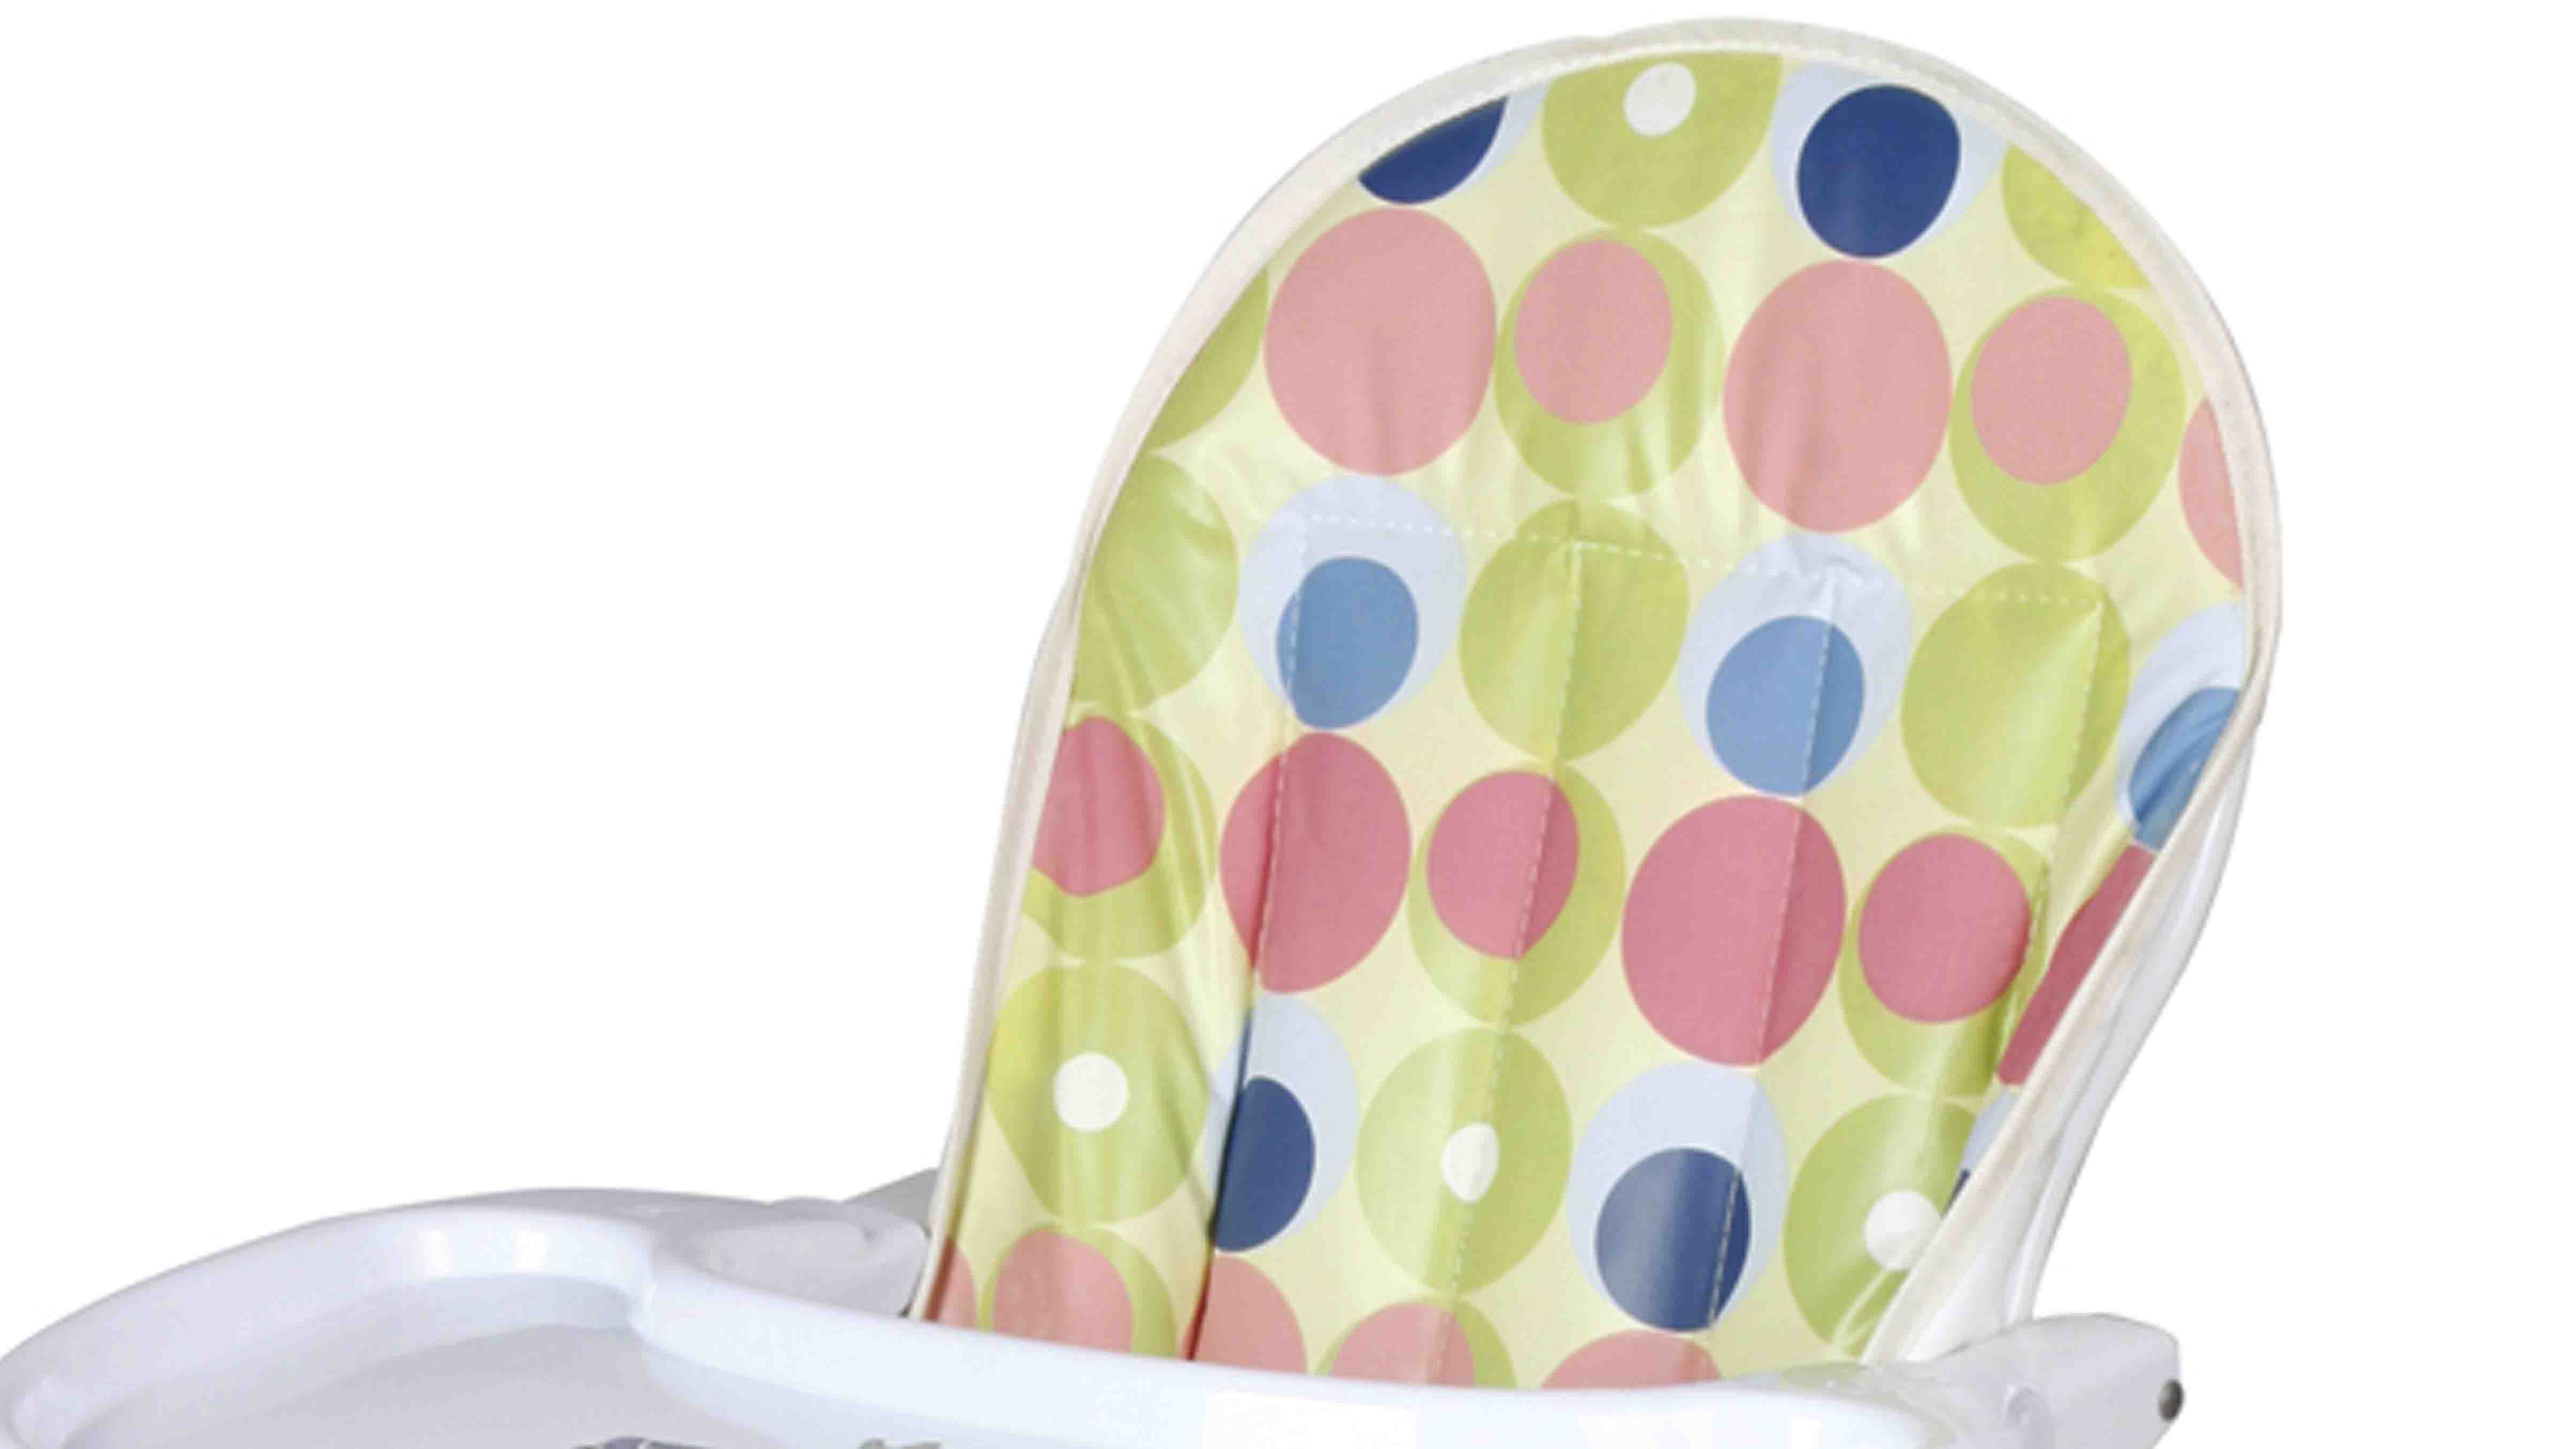 Aoqi foldable foldable baby high chair directly sale for home